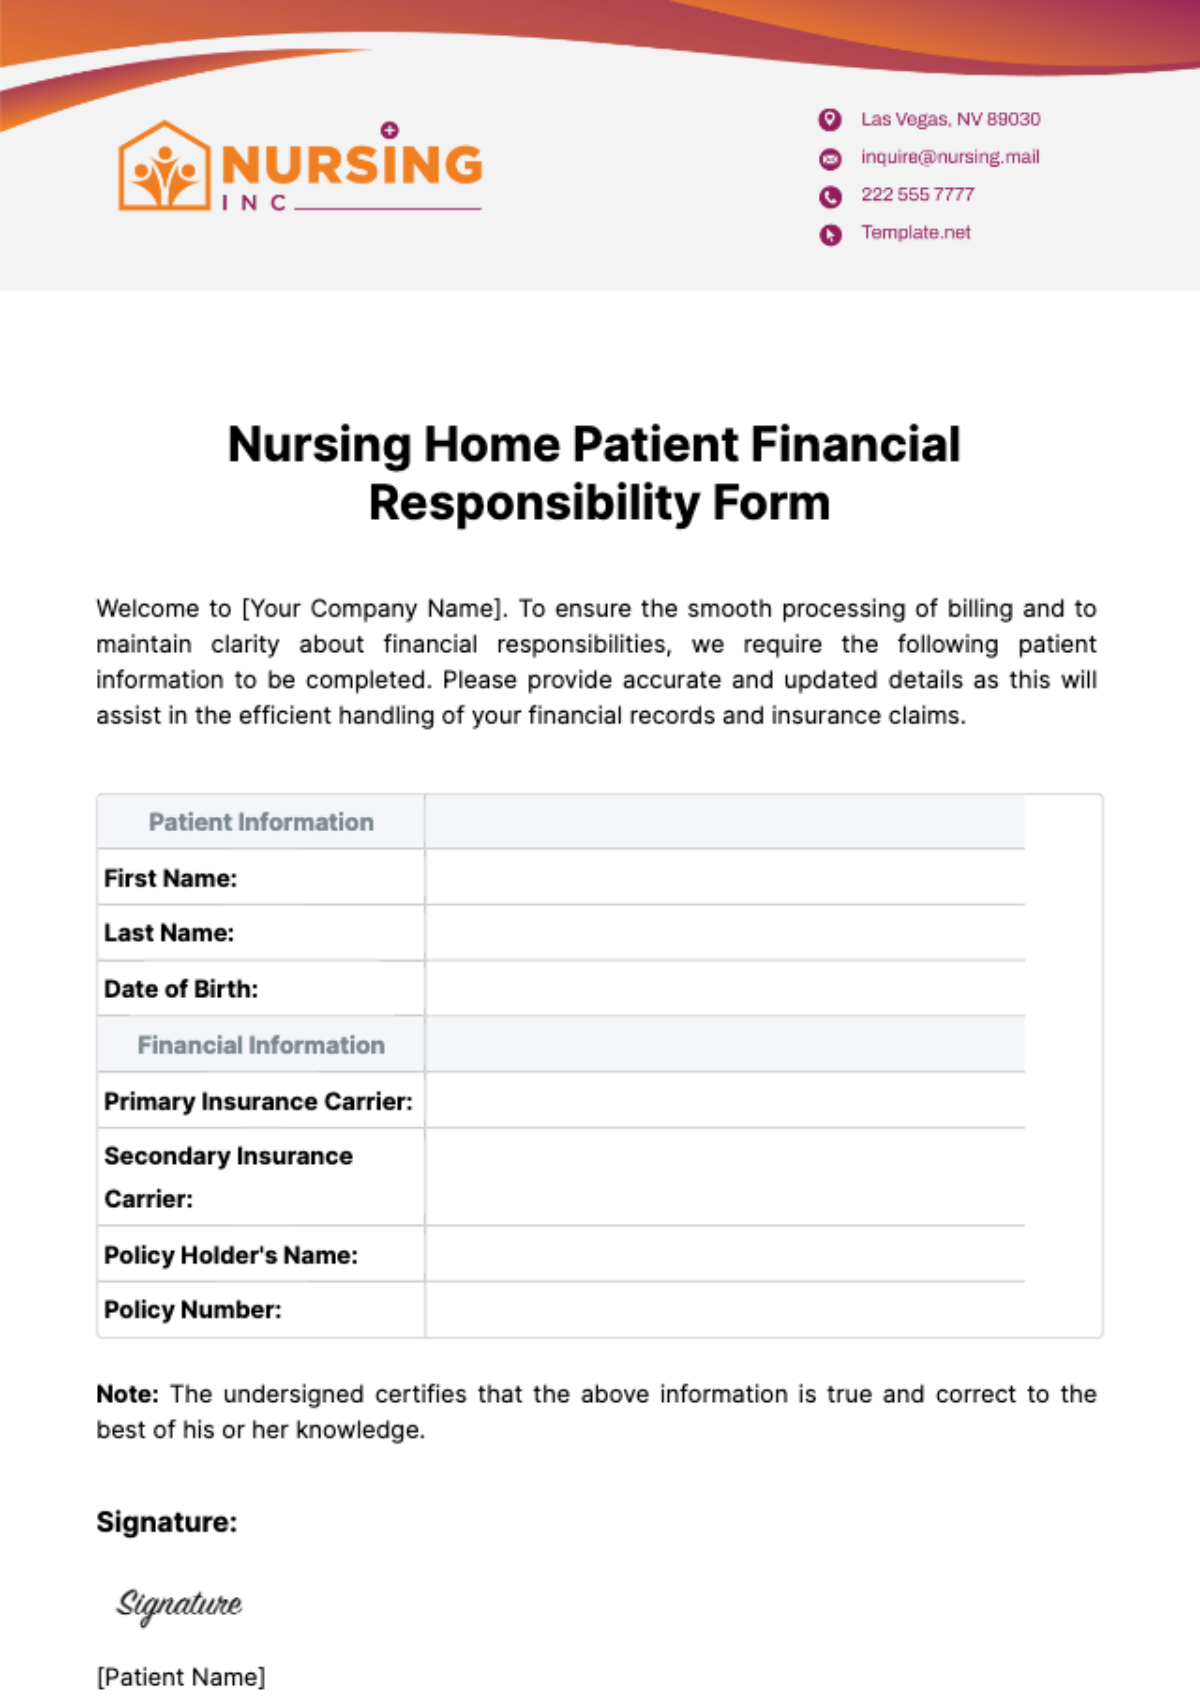 Free Nursing Home Patient Financial Responsibility Form Template